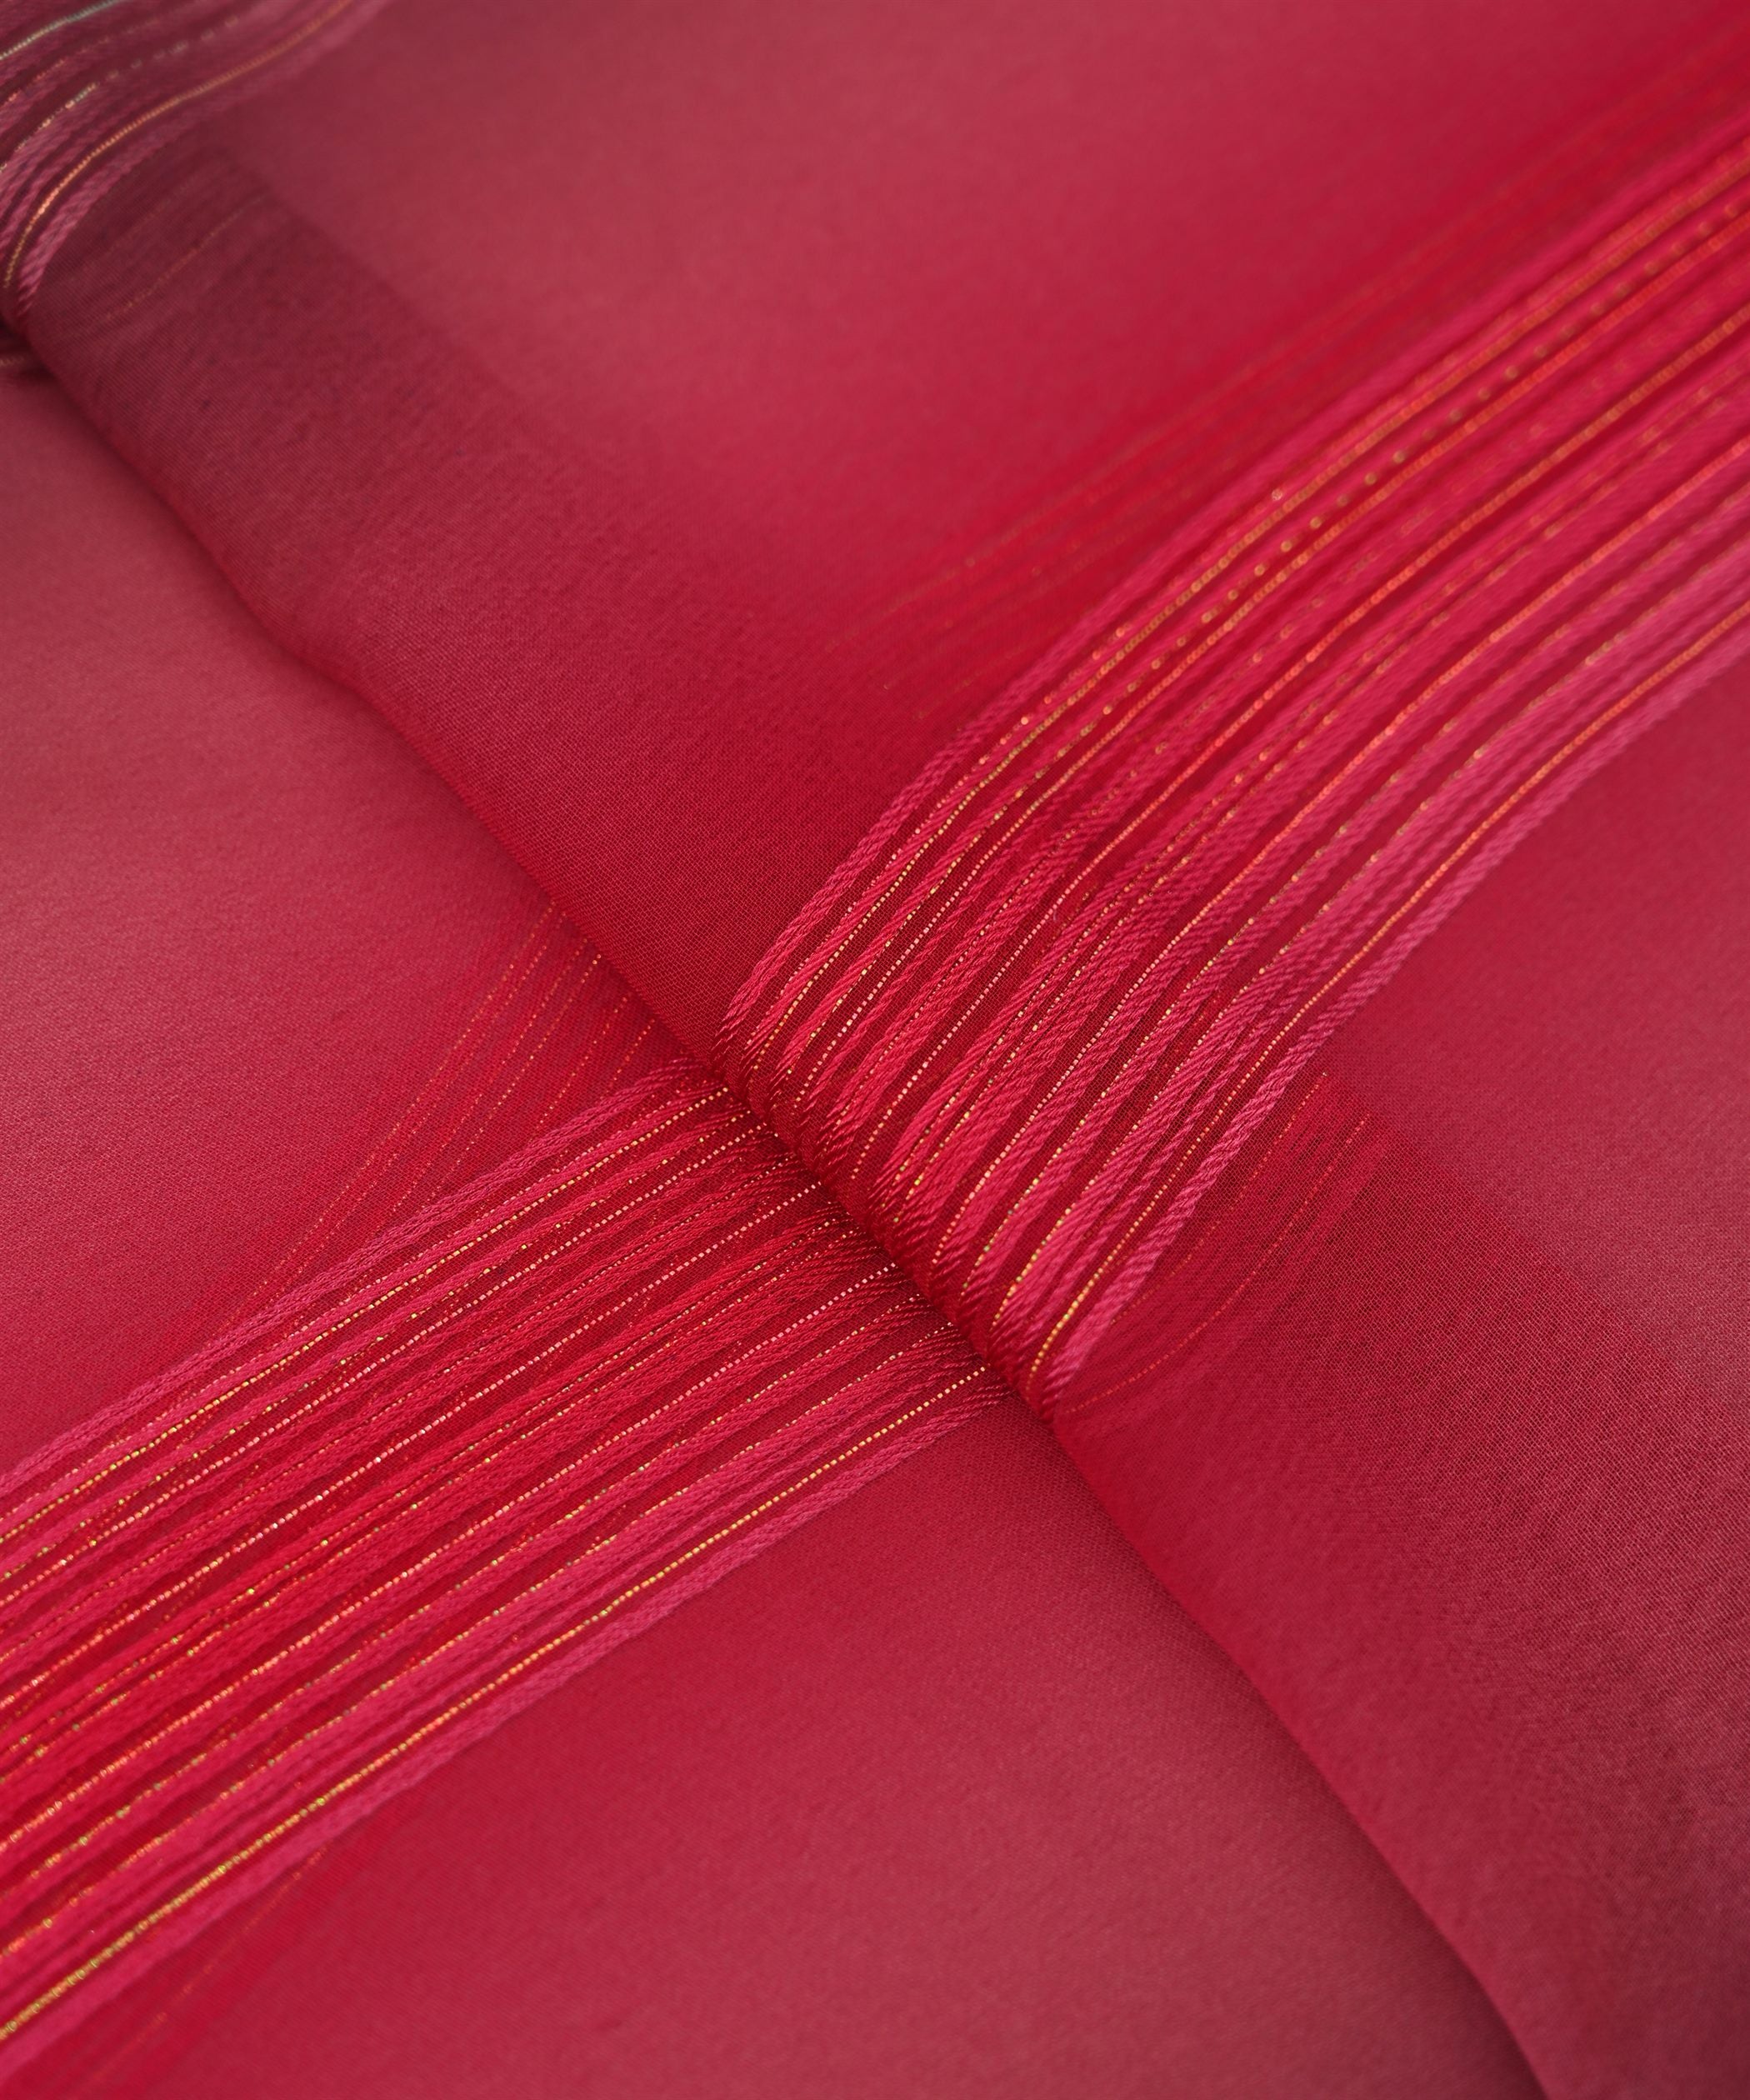 Hot Pink Multi-colored Georgette Fabric with Satin Stripes